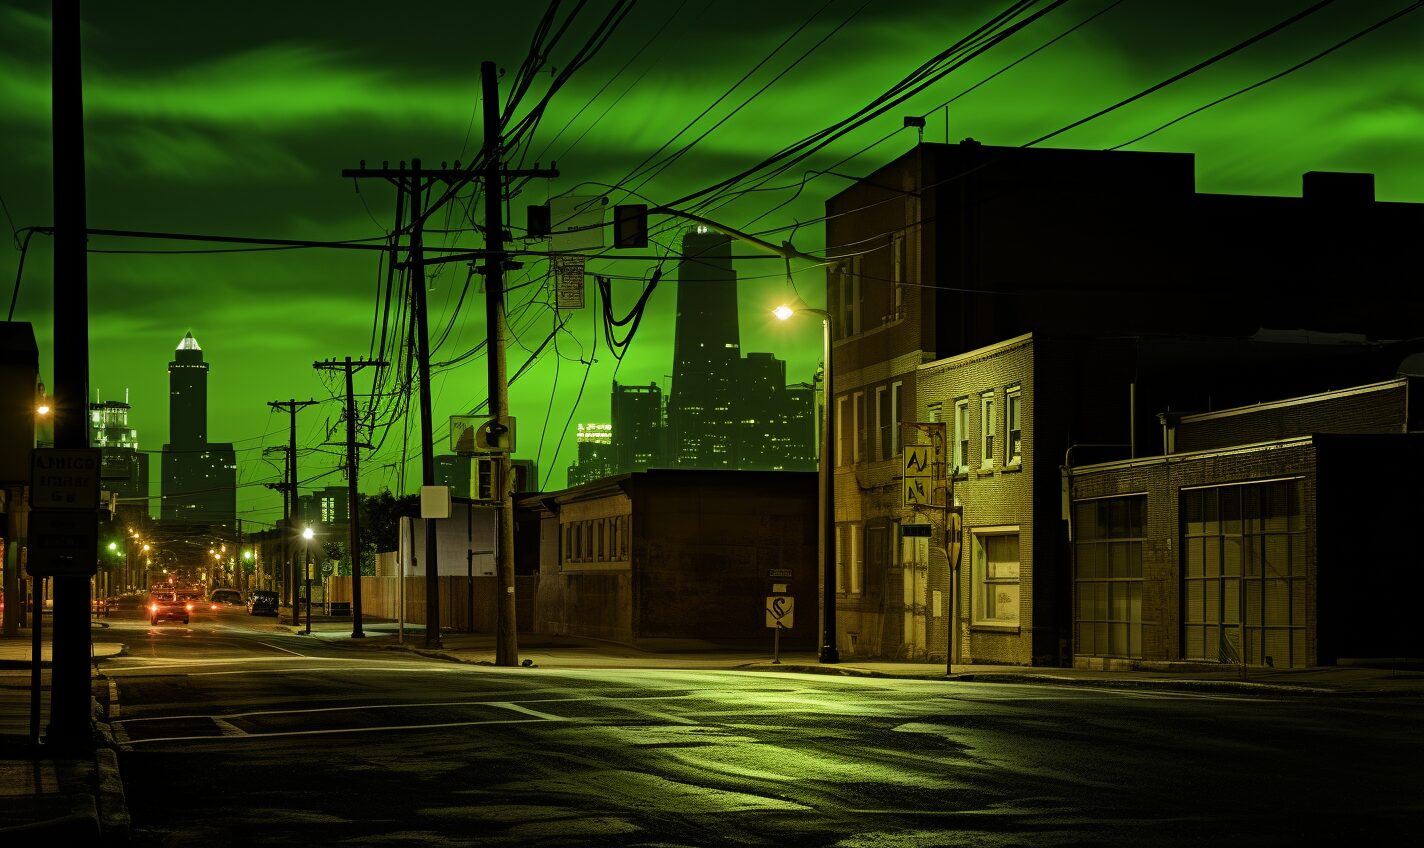 lancaster, pennsylvania in black and neon green glow